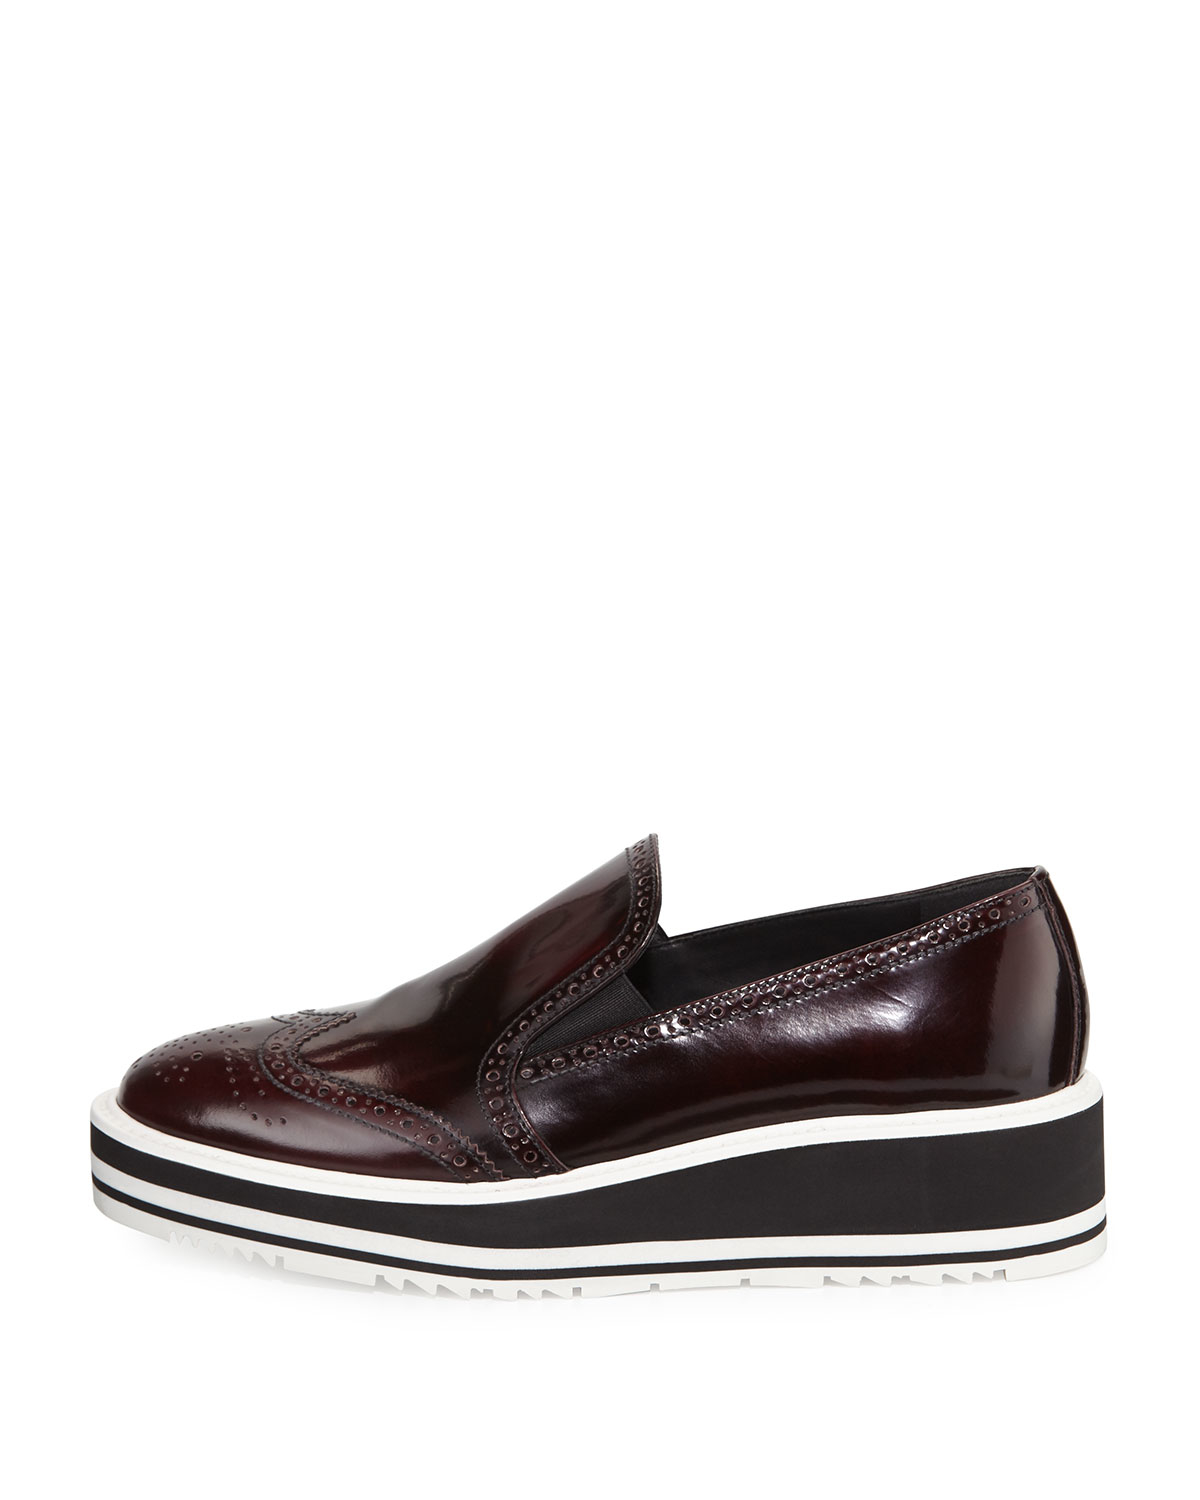 Lyst - Prada Polished Leather Platform Loafers in Brown